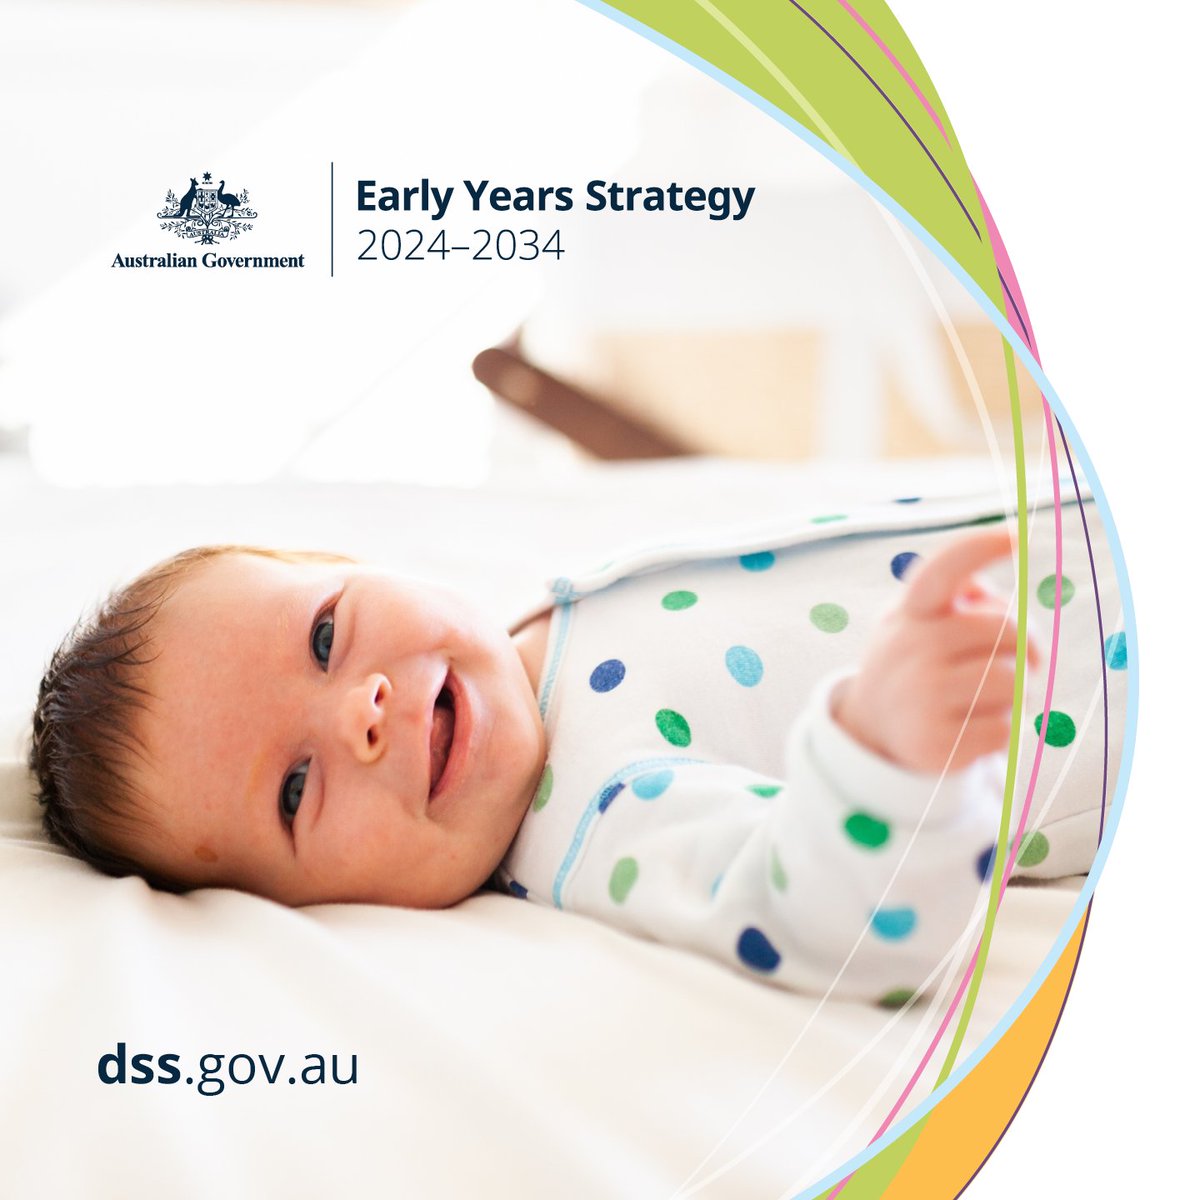 The #EarlyYearsStrategy🧑‍🍼released today provides a roadmap to support families and communities to create the environments that children need to learn, grow and thrive. Read a snapshot of the Strategy here: bit.ly/3UwSRZj #ECEC #EarlyYears